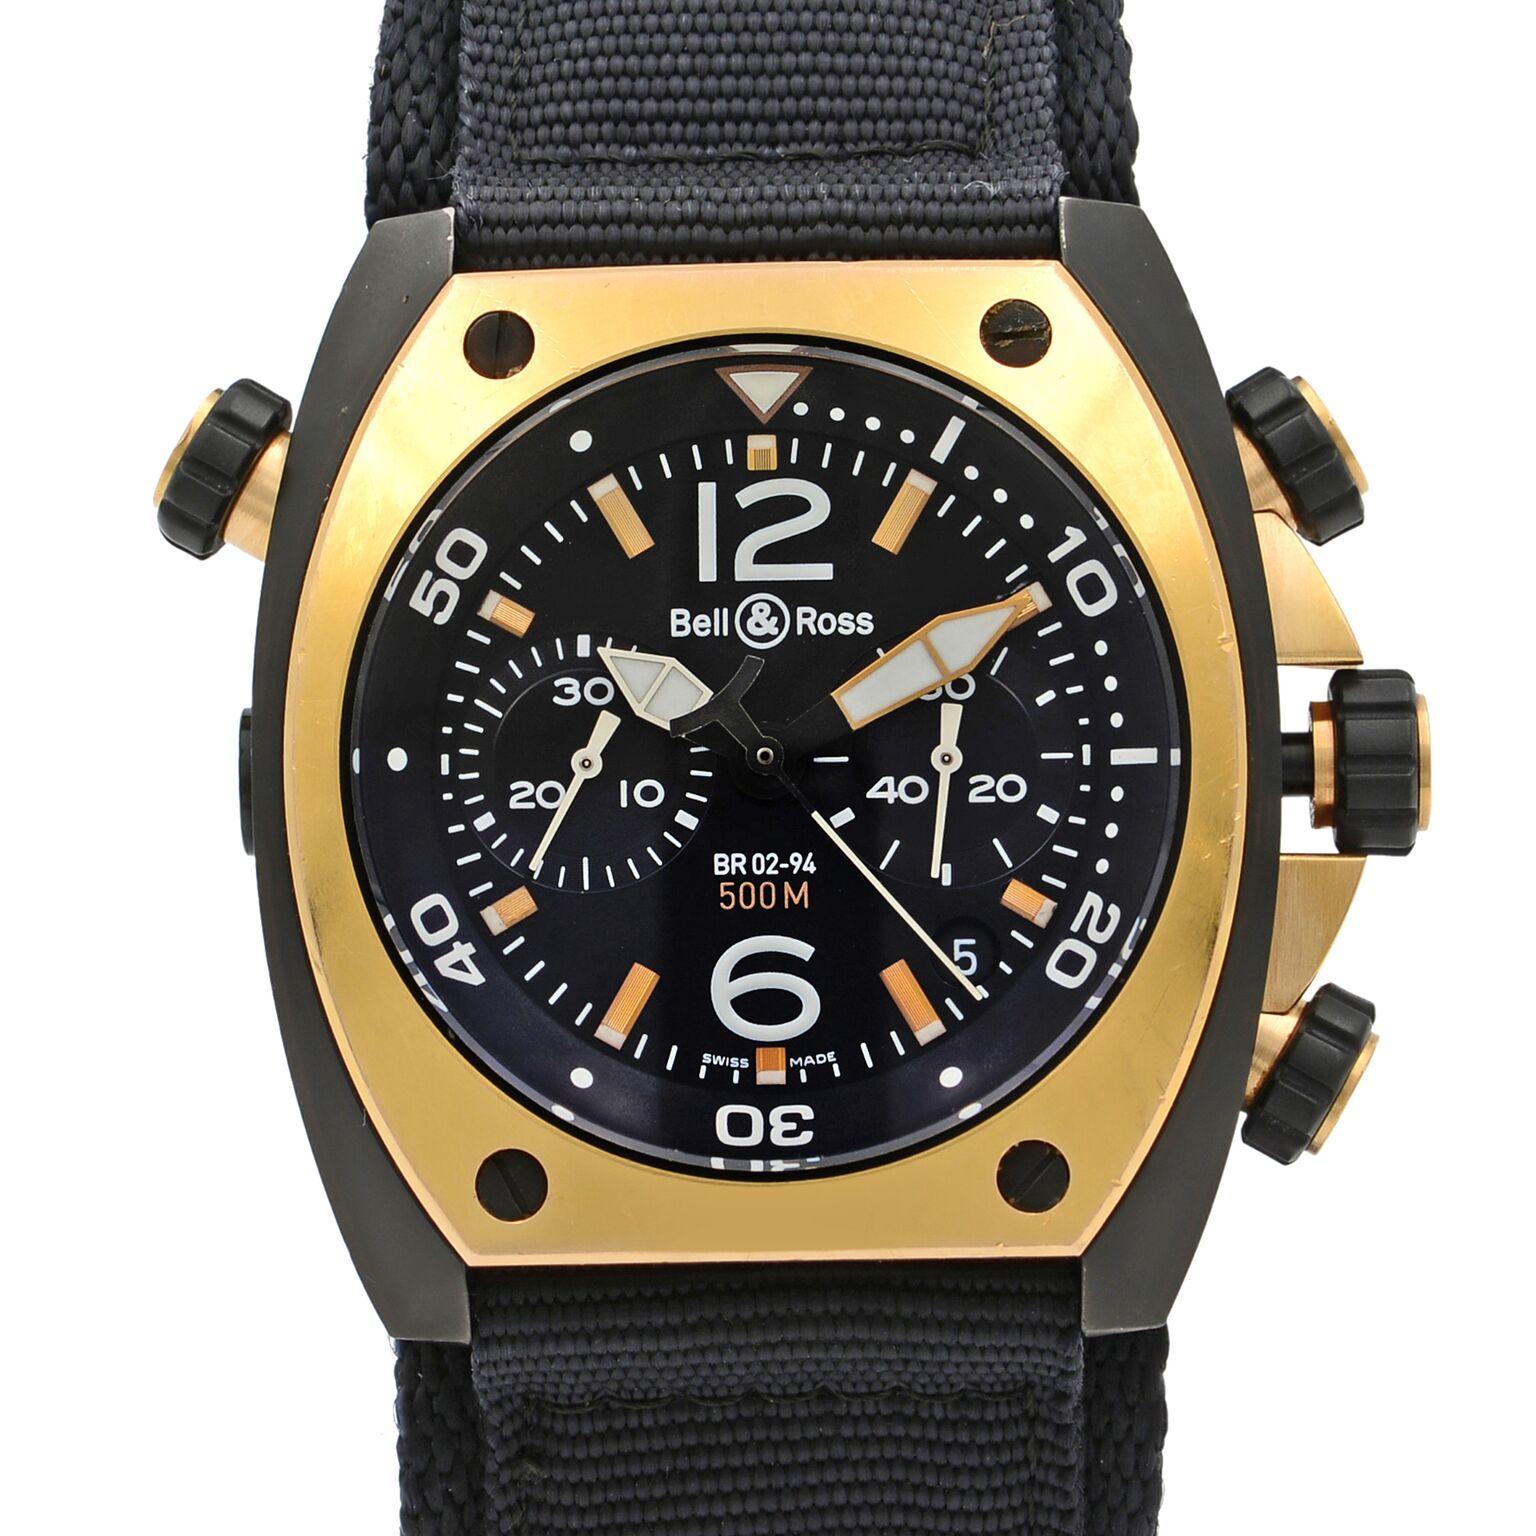 This pre-owned Bell & Ross Marine  BR-02-94 is a beautiful men's timepiece that is powered by a mechanical (automatic) movement which is cased in a stainless steel case. It has a tonneau shape face, small seconds subdial dial, and has hand sticks &